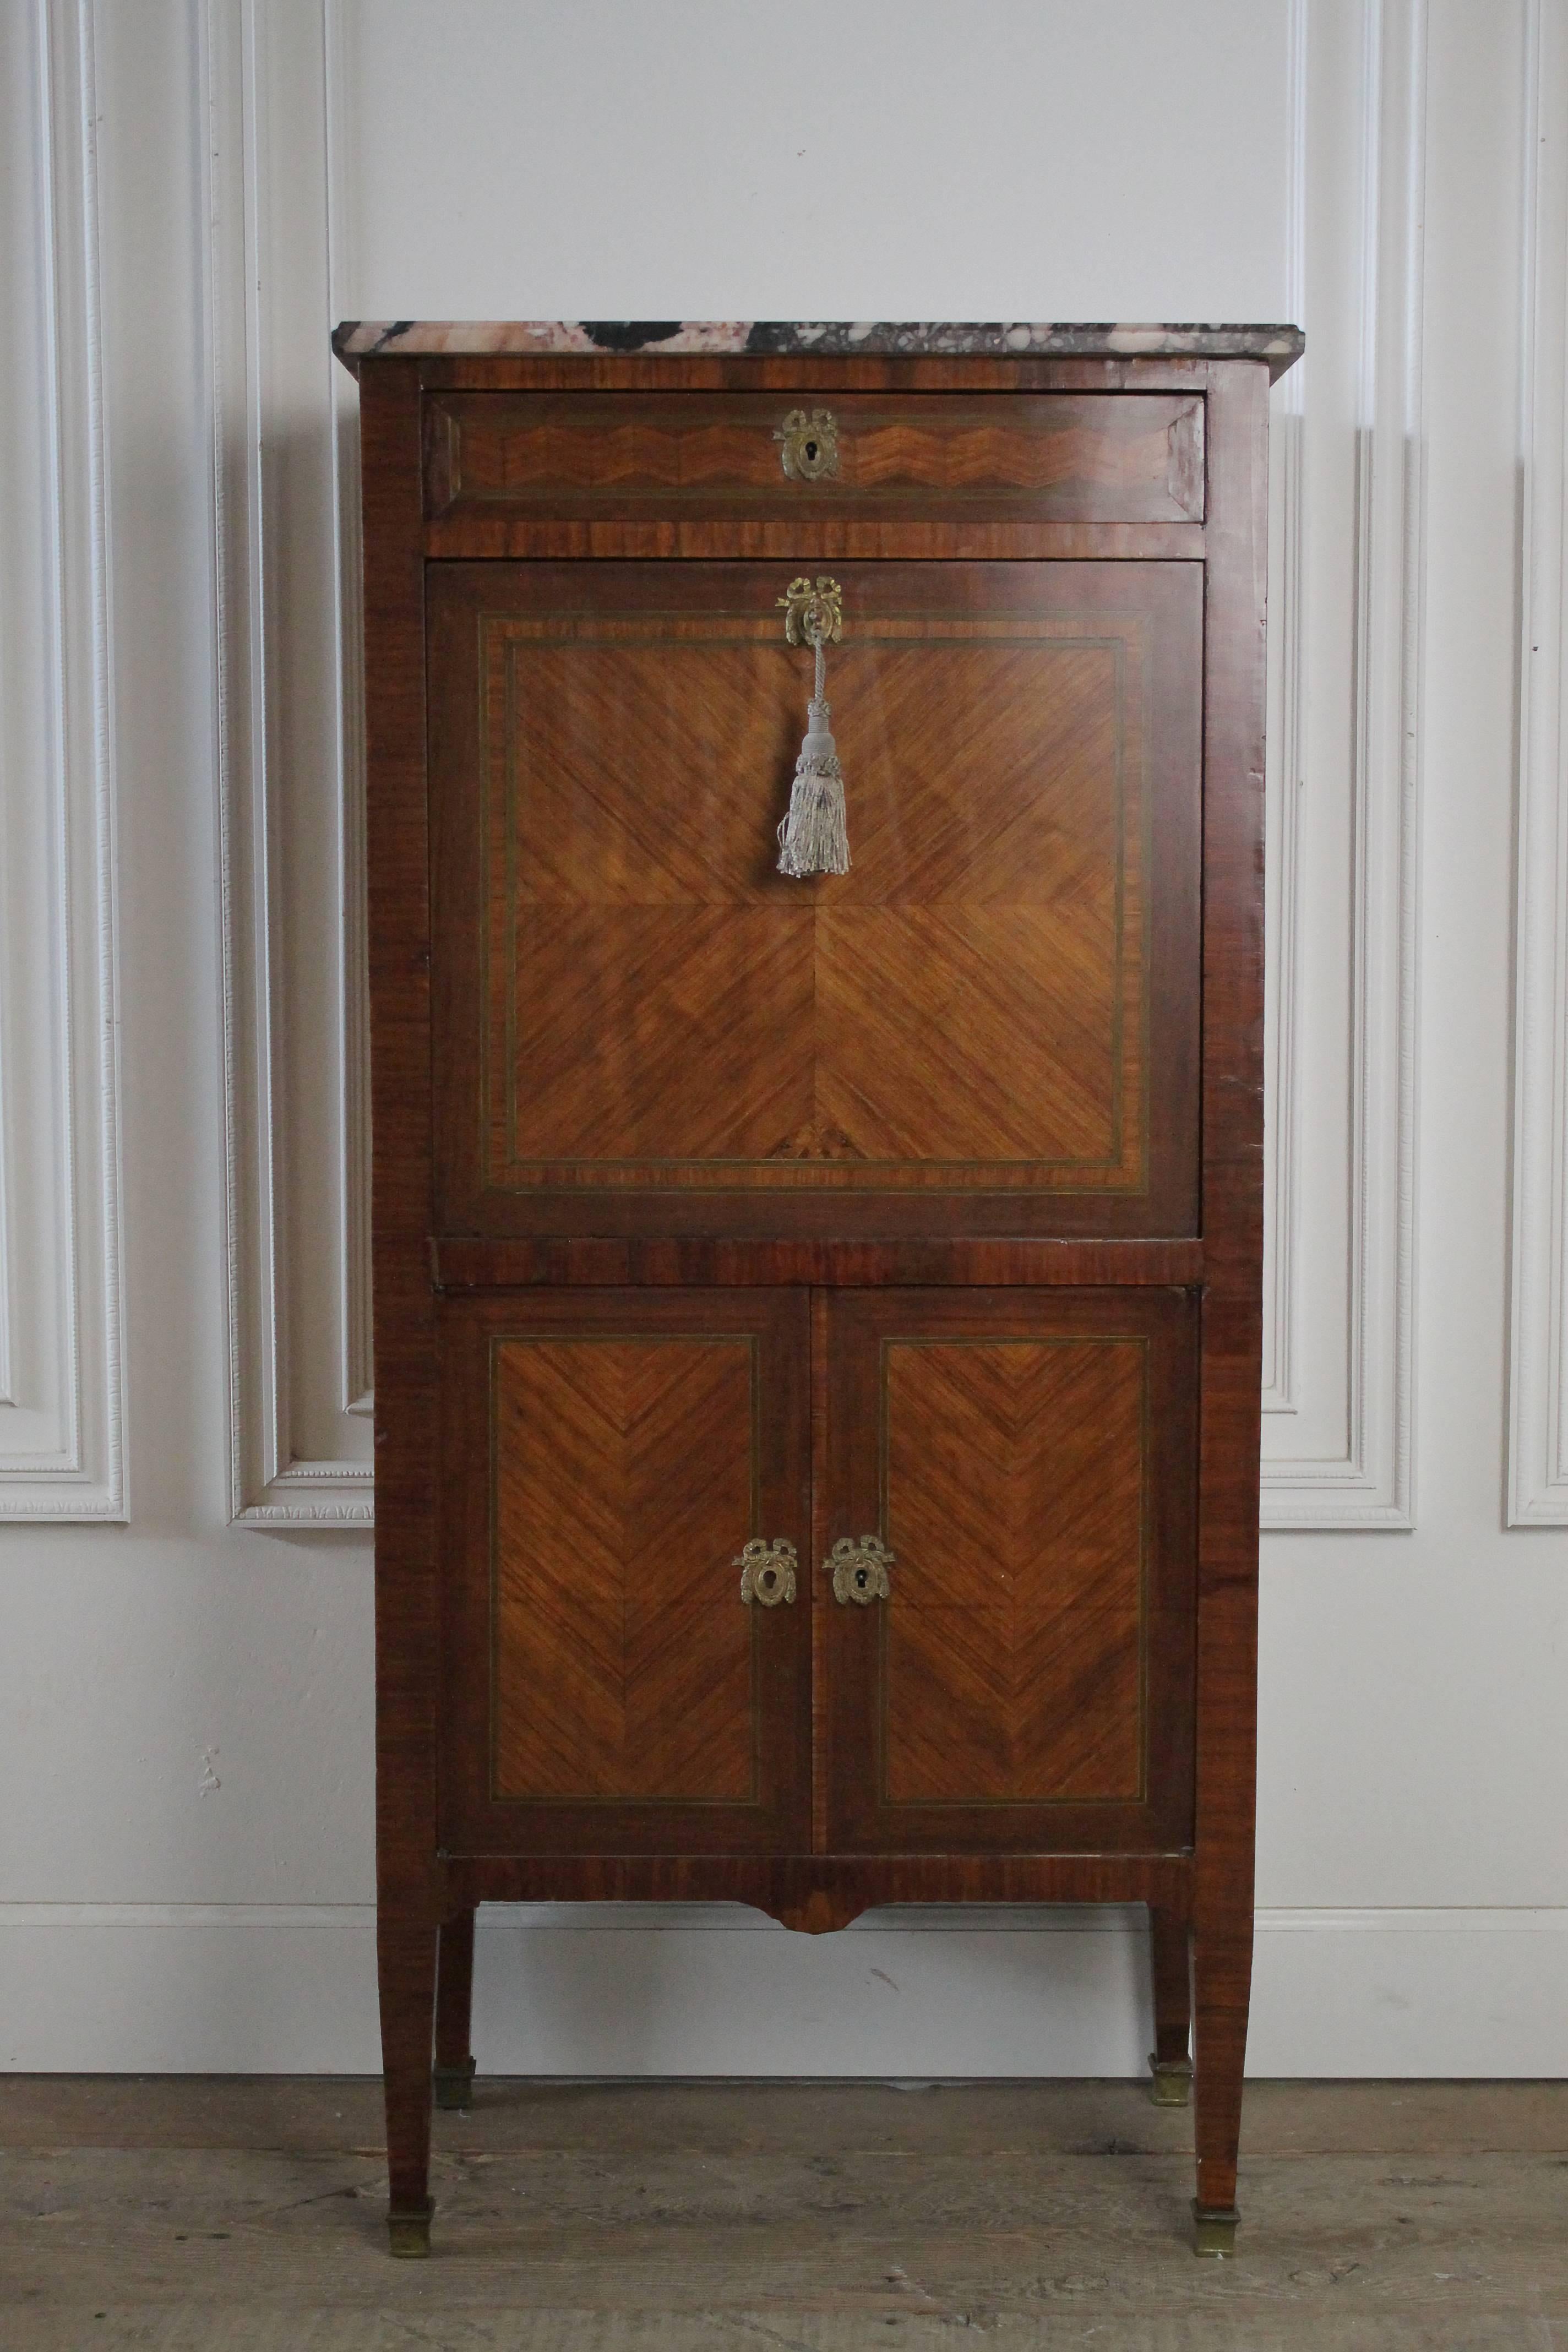 Lovely French abattant secretaire with beautiful inlays. Original brass hardware and working locking key and hassle.
Legs are sturdy, drawers and doors open with ease. The key work on the drop down portion of the secretaire.
Marble top is in good